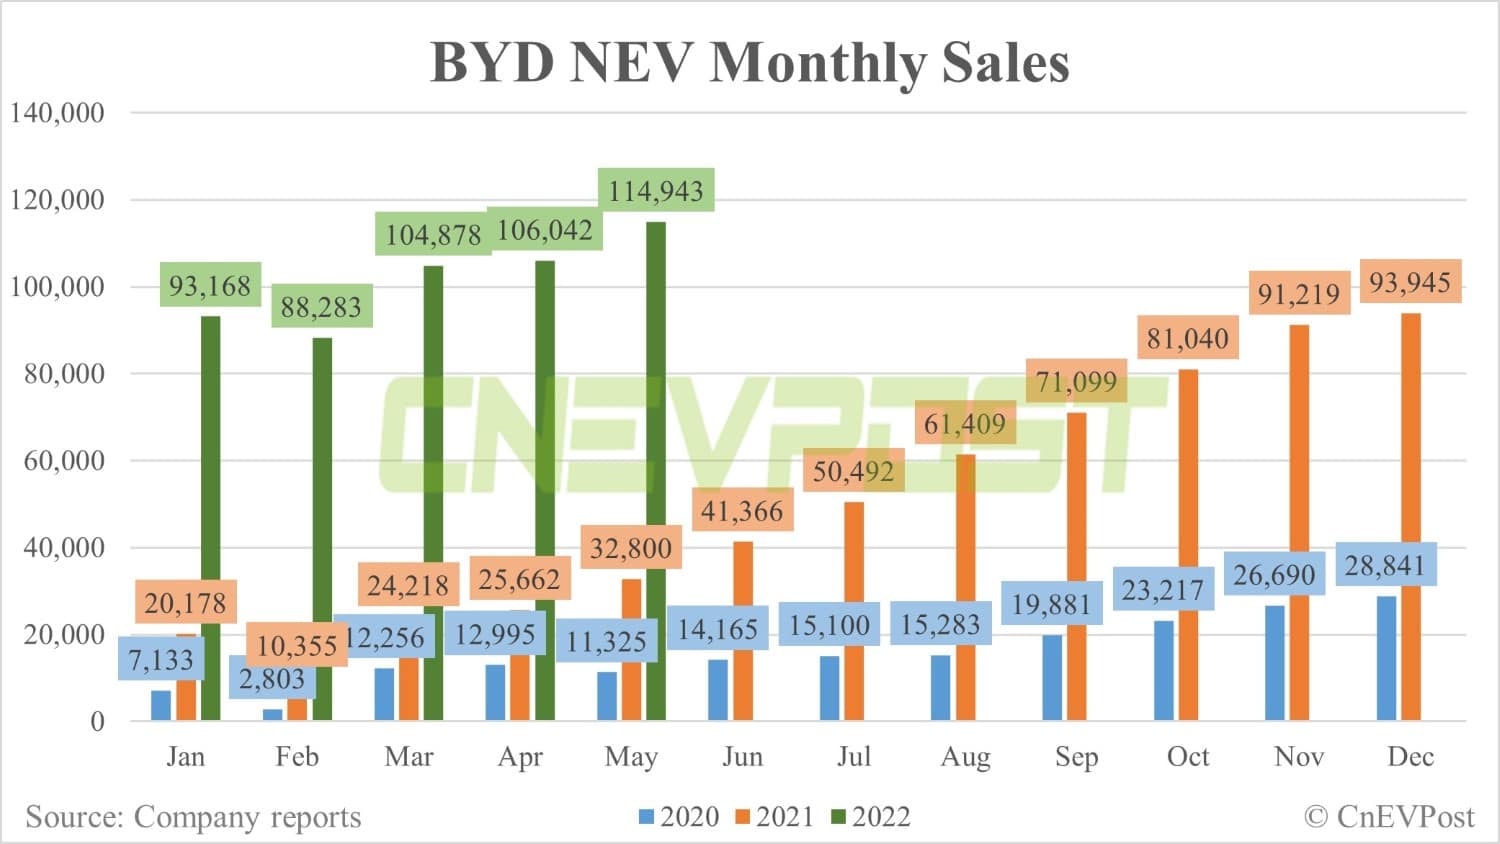 BYD to supply batteries to Tesla, exec confirms-CnEVPost